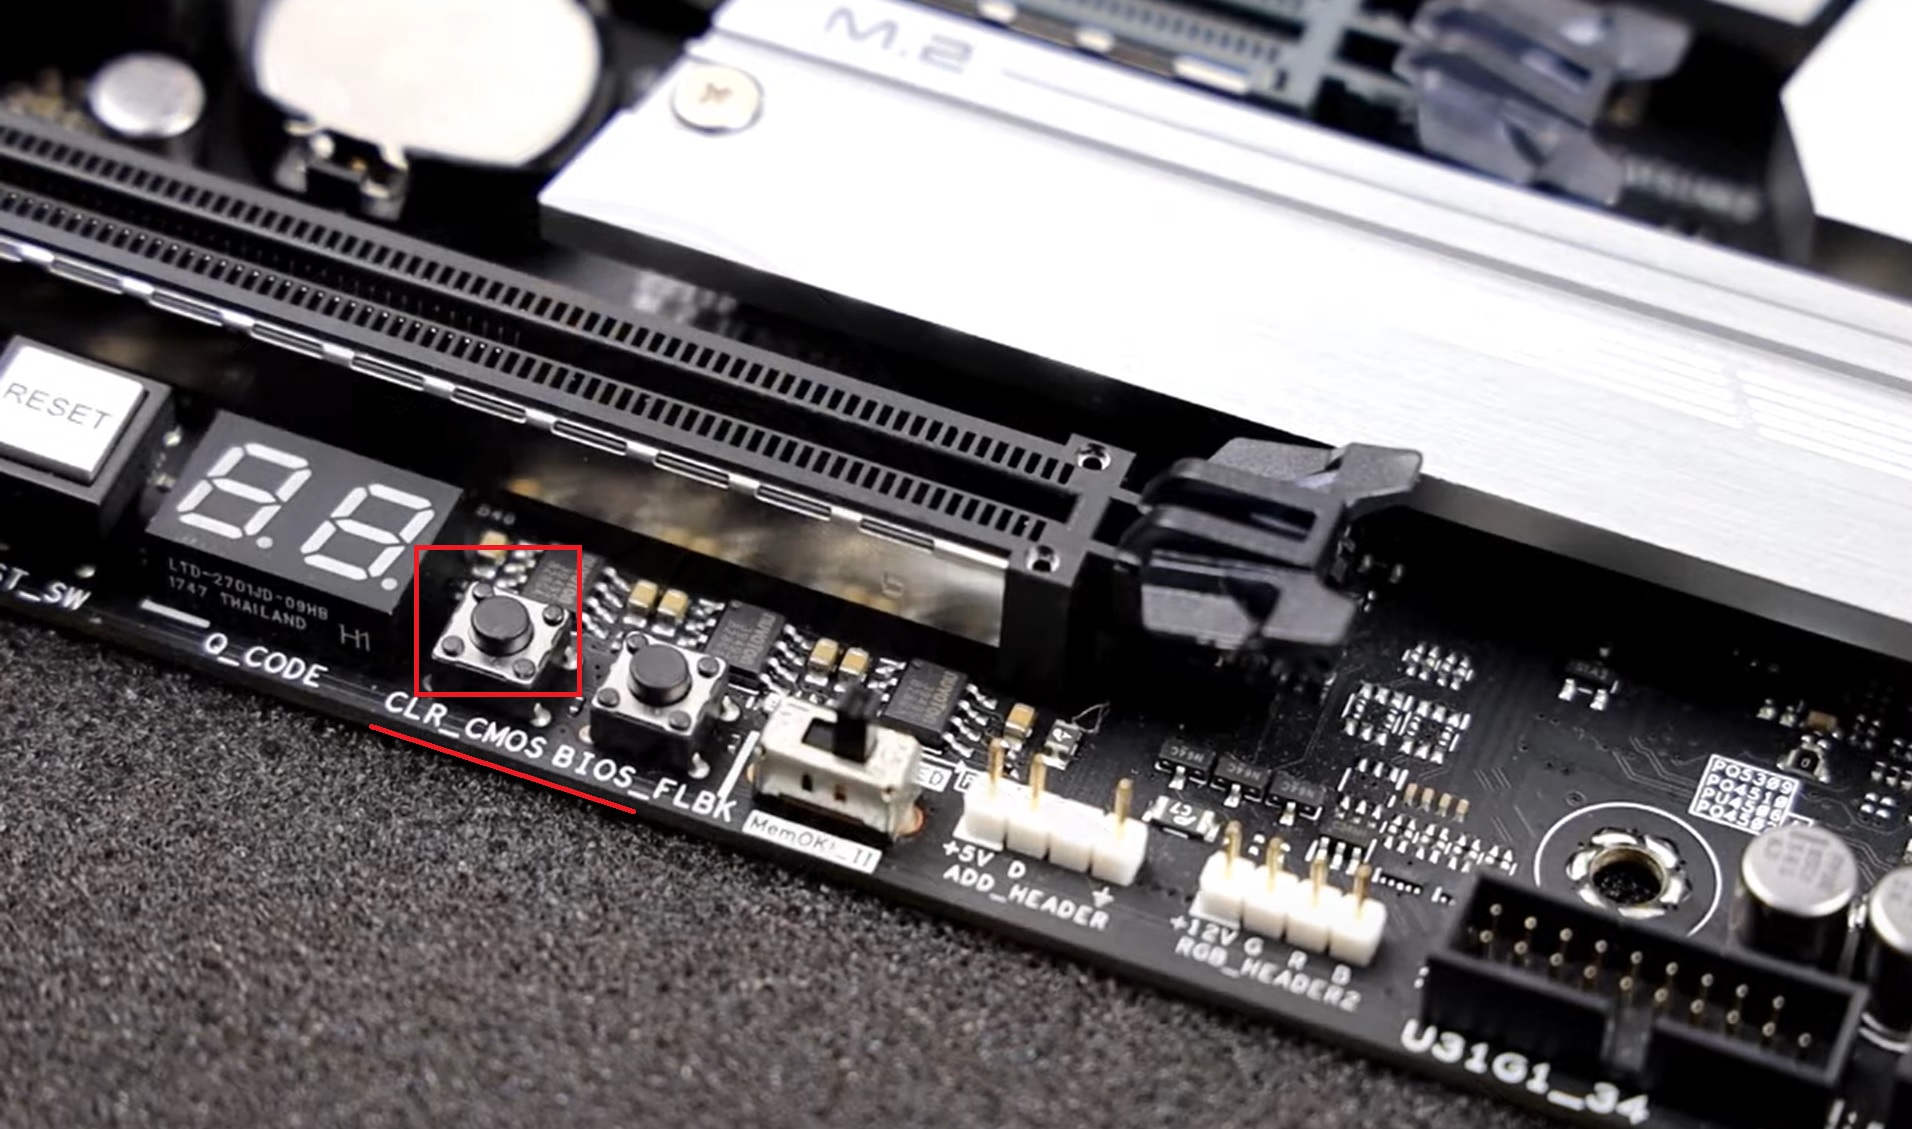 clear cmos button on asus motherboard